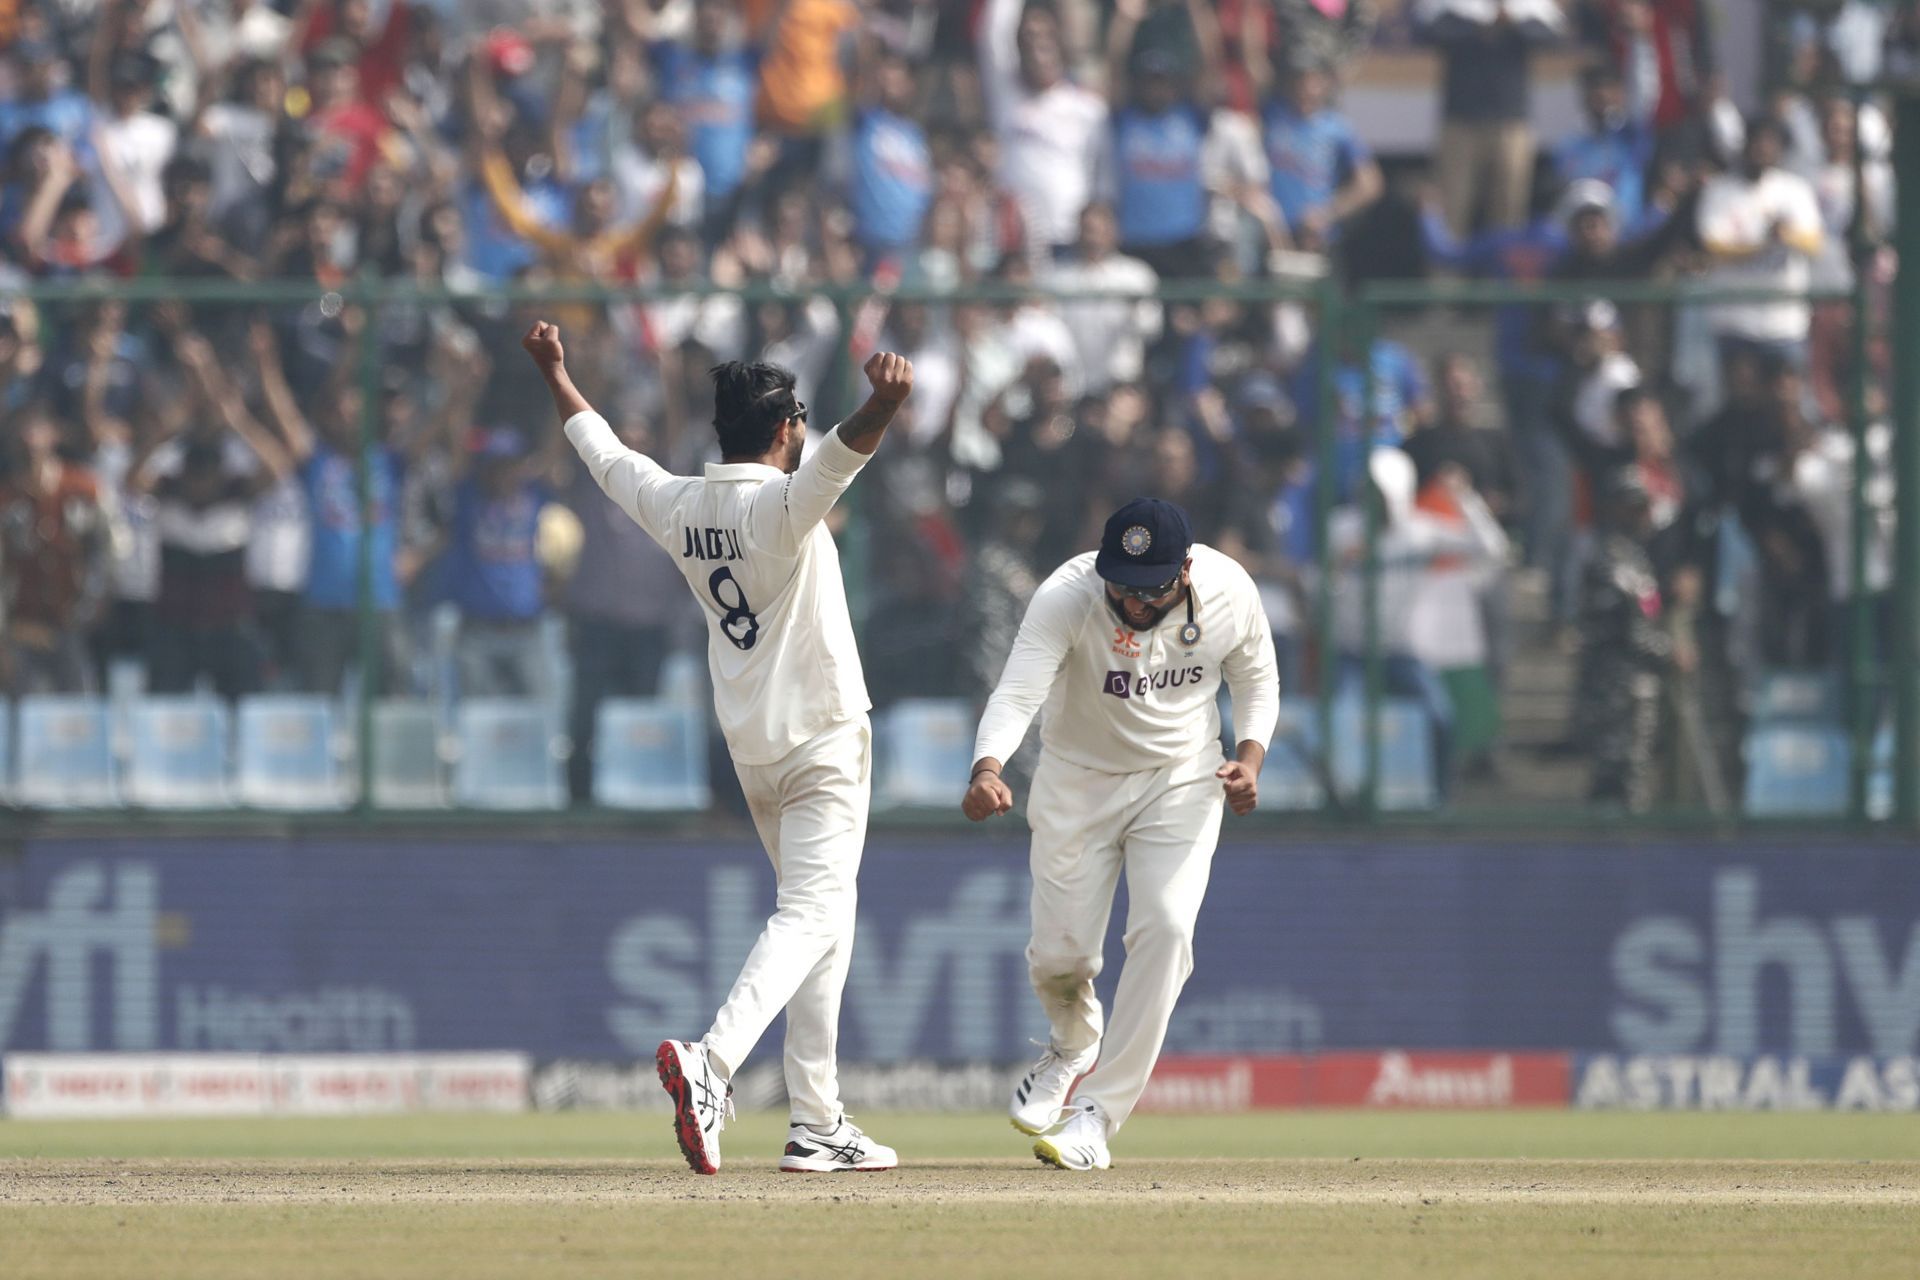 Ravindra Jadeja ripped through Australia in the Delhi Test earlier this year. (Pic: Getty Images)